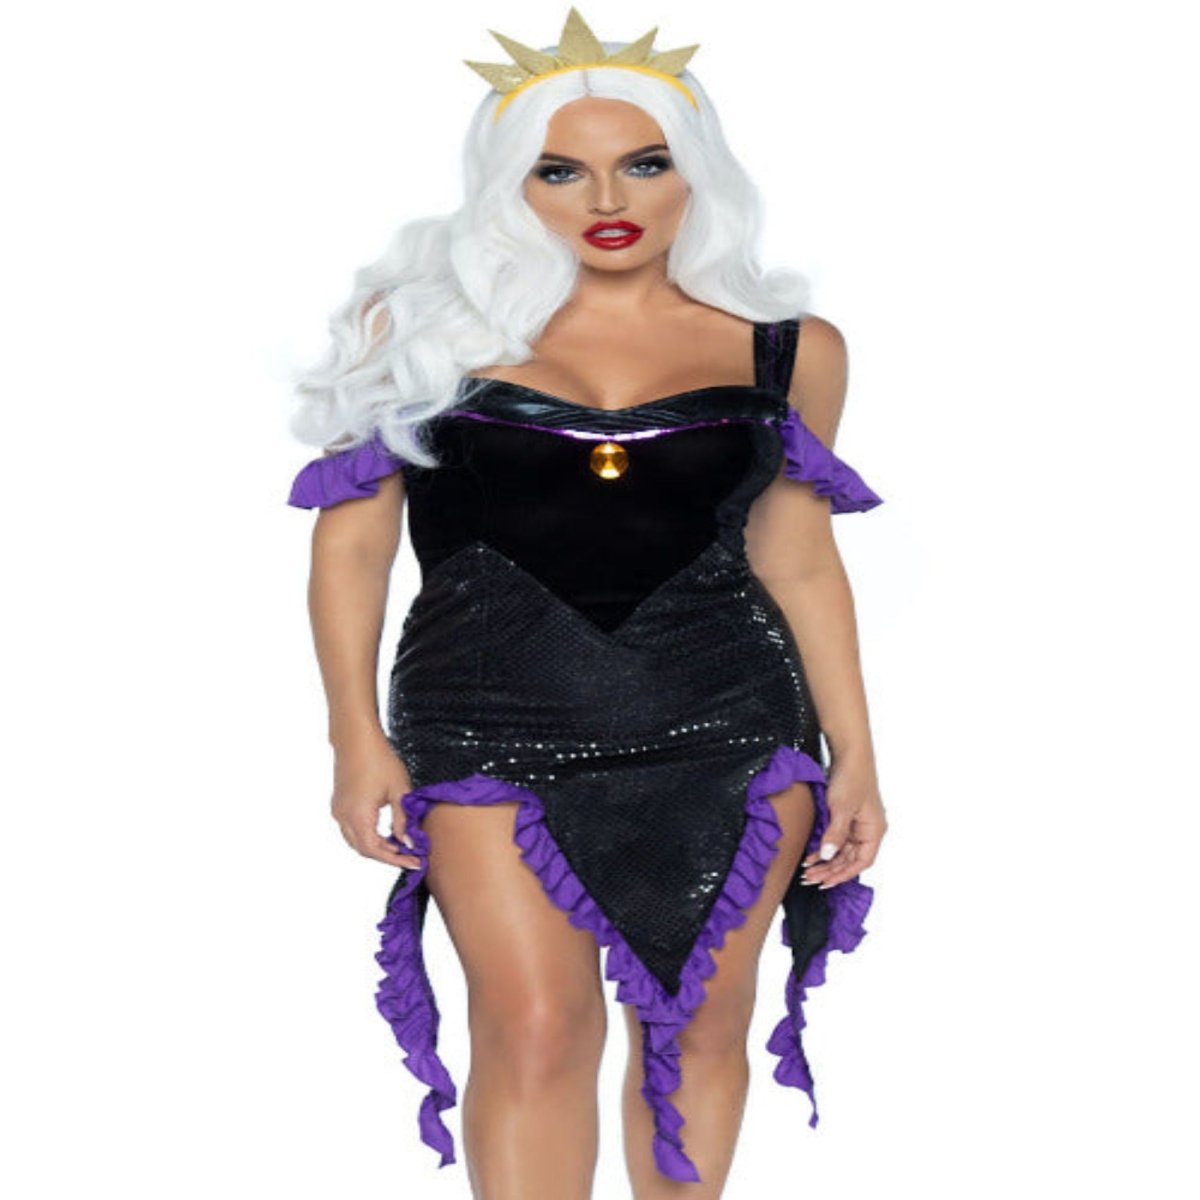 Sultry Sea Witch Costume - worldclasscostumes